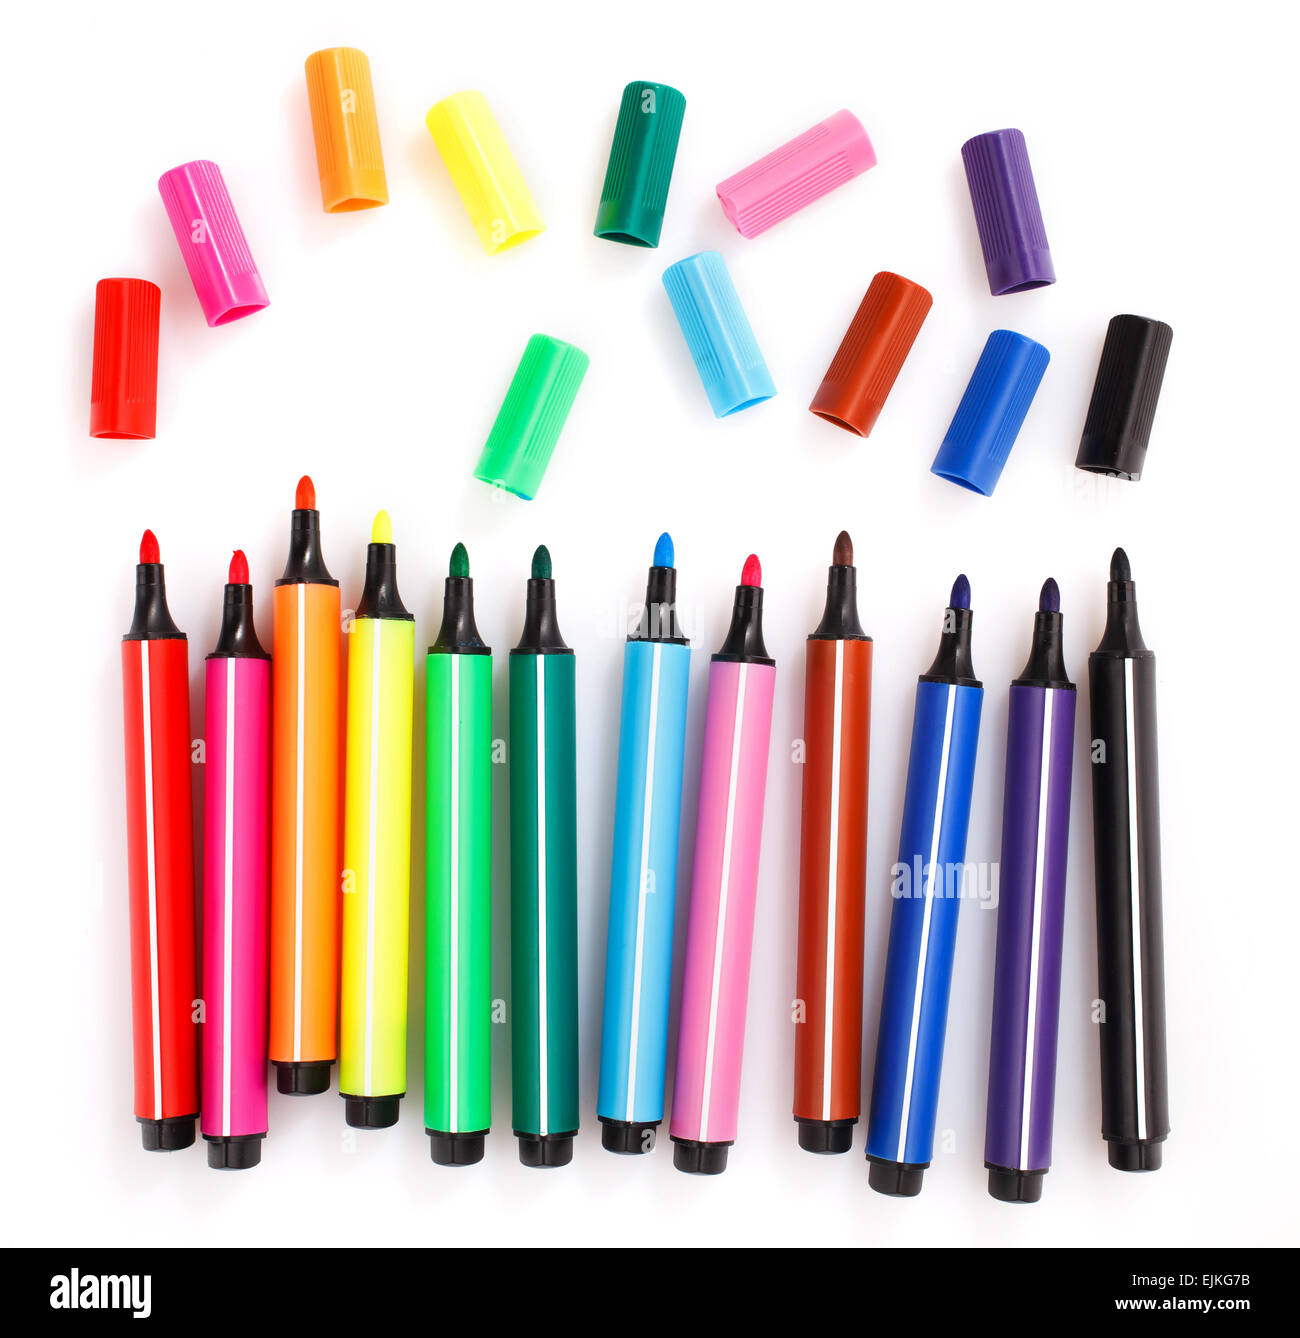 Multicolor pens on white background. #1 Photograph by Fernando